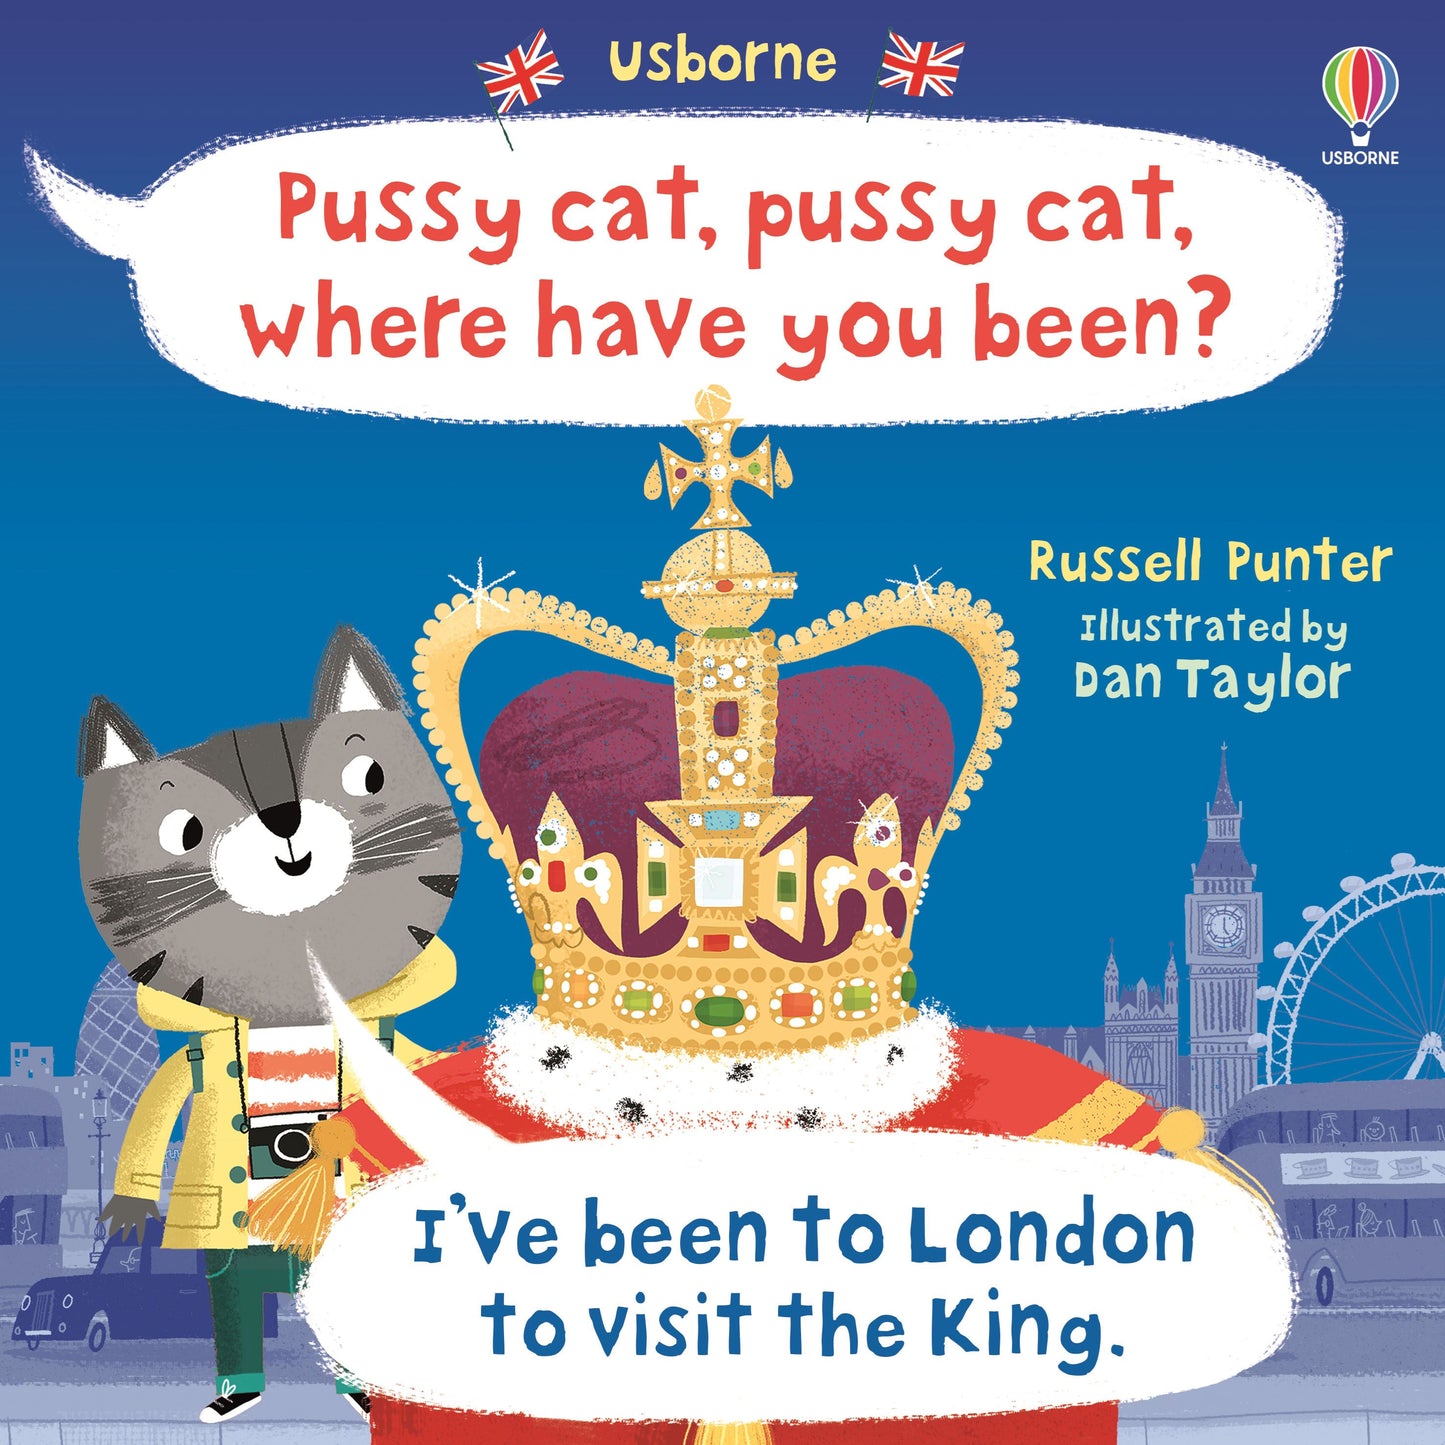 charming version of the classic nursery rhyme, updated to give Pussycat a full tour of London before he calls on the King. He visits famous sights including the Tower of London, Shakespeare’s Globe, St Paul’s Cathedral, and Nelson’s Column, and enjoys the view from the top of the Shard and a ride on the London Eye. With beautiful illustrations, this picture book makes a lovely gift or souvenir of a trip to London. pussy cat where have you been